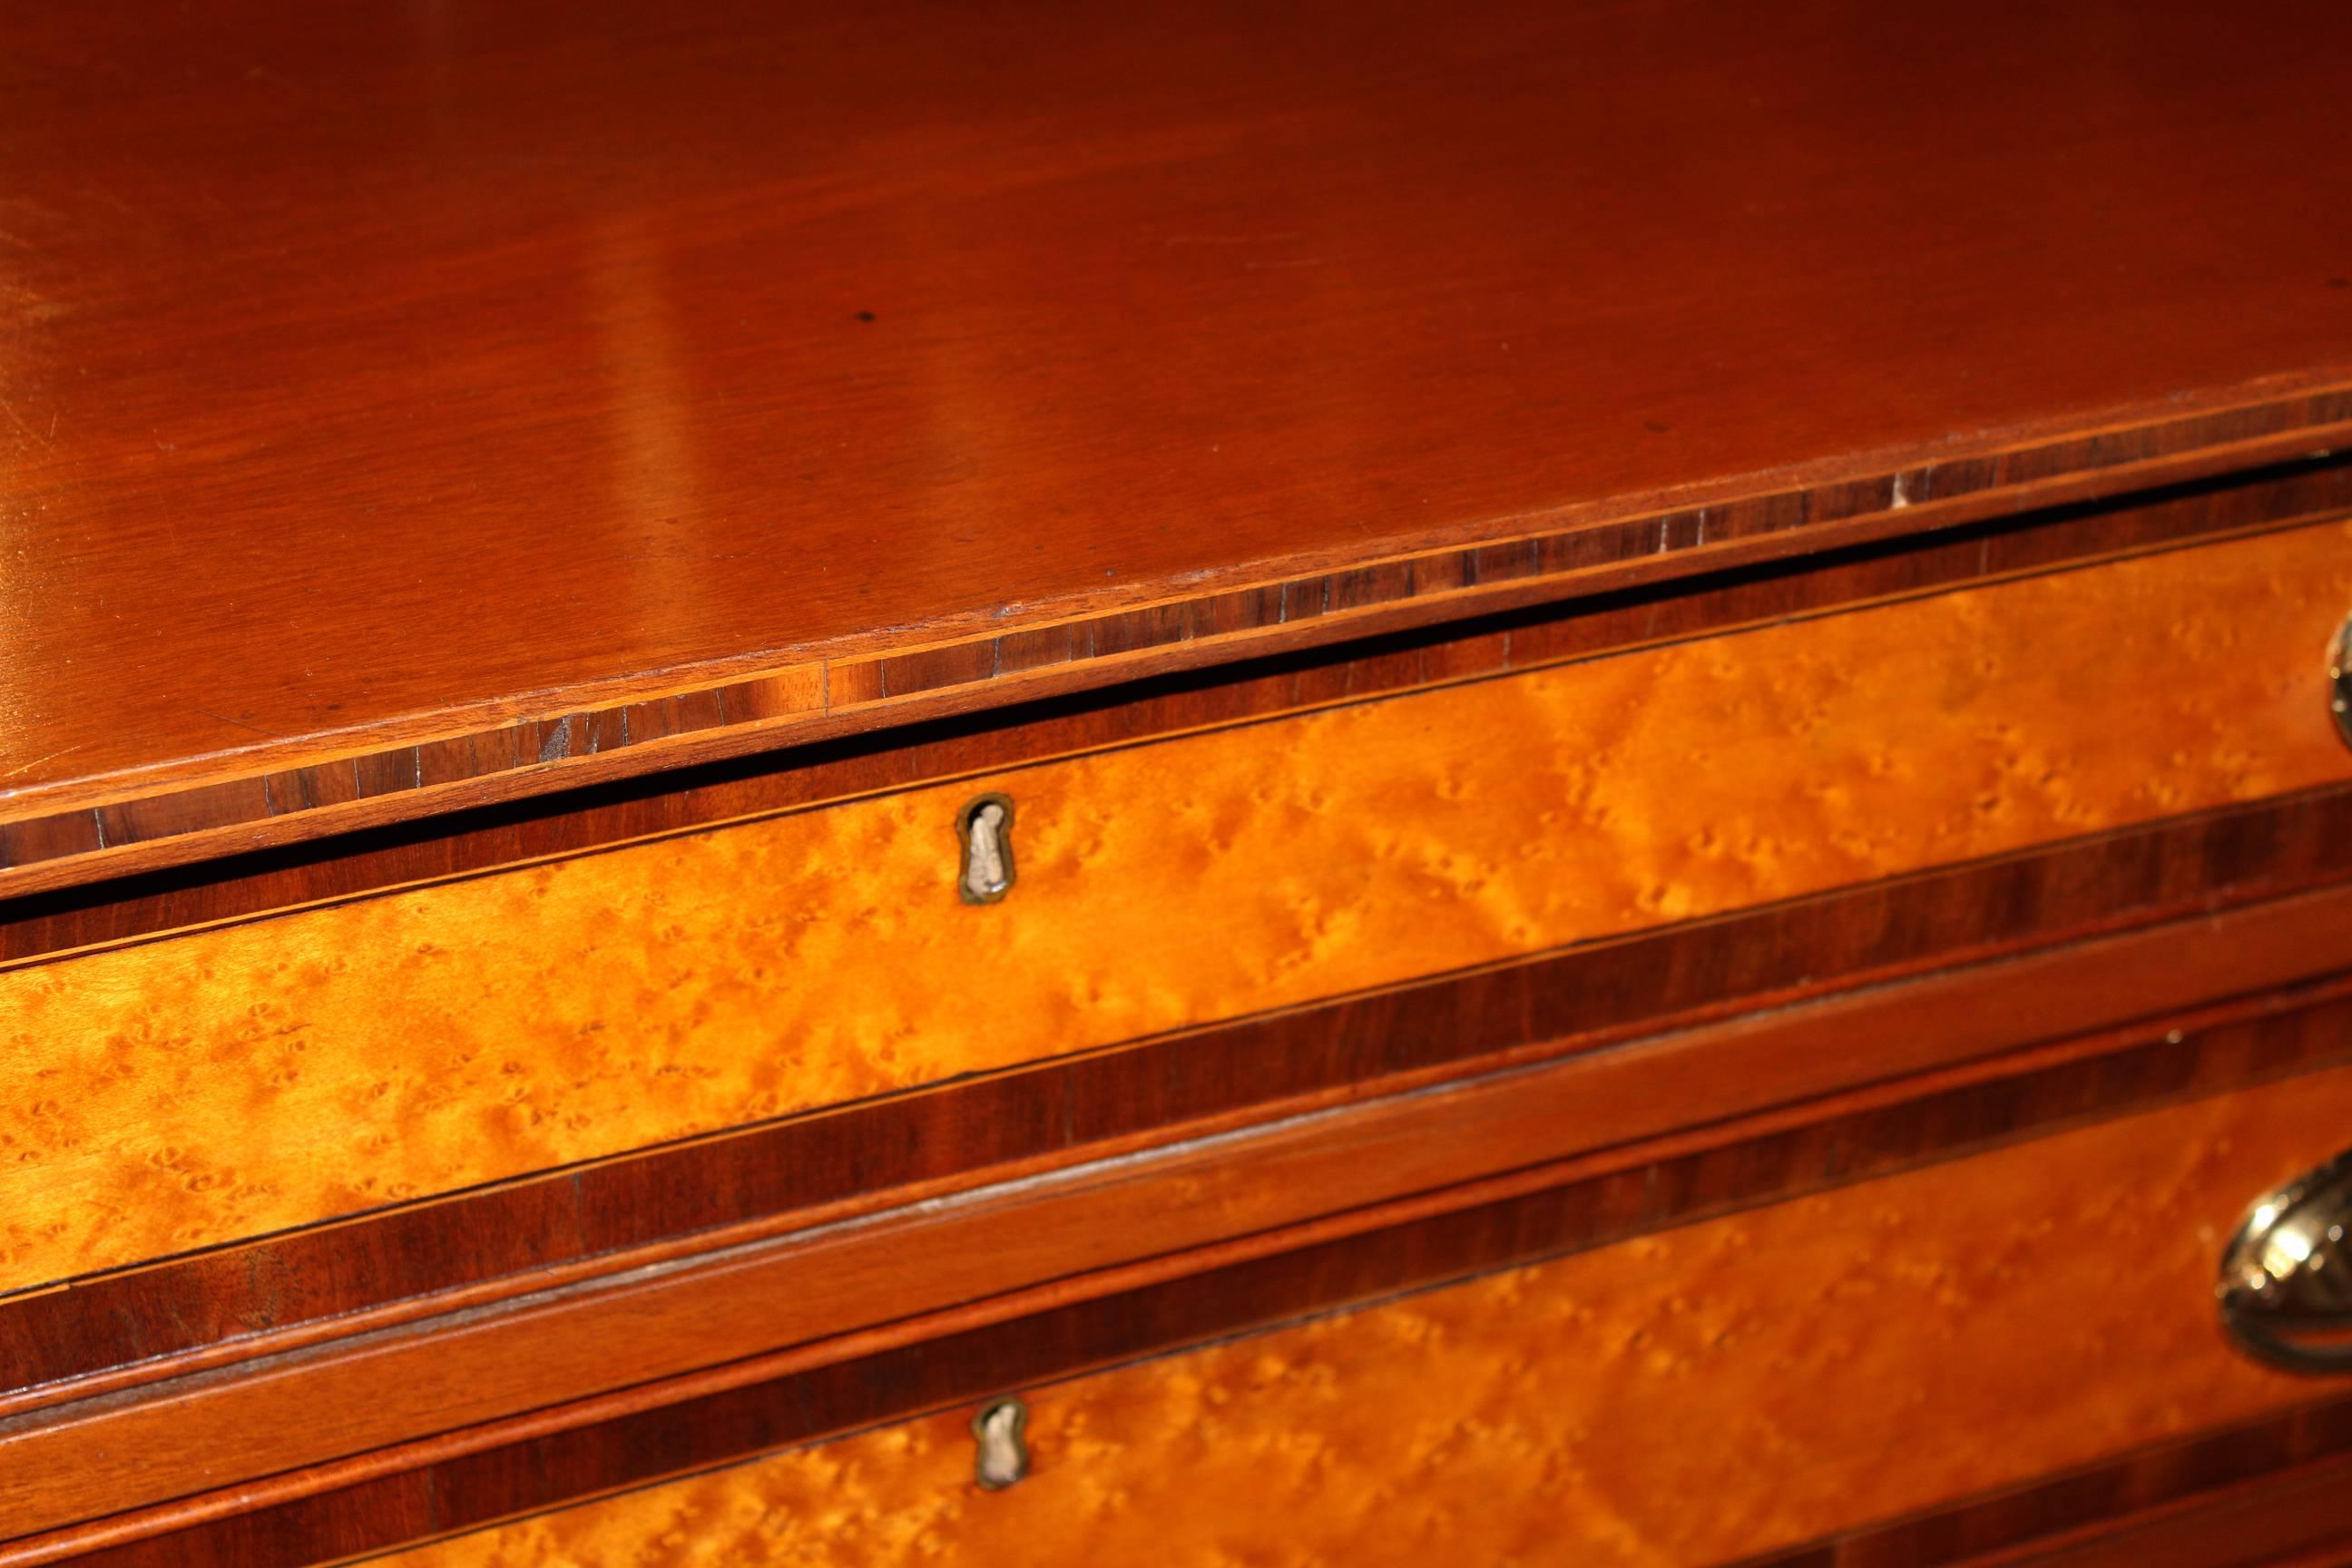 Carved Federal Period Hepplewhite Chest of Drawers with Birdseye Maple Drawer Fronts